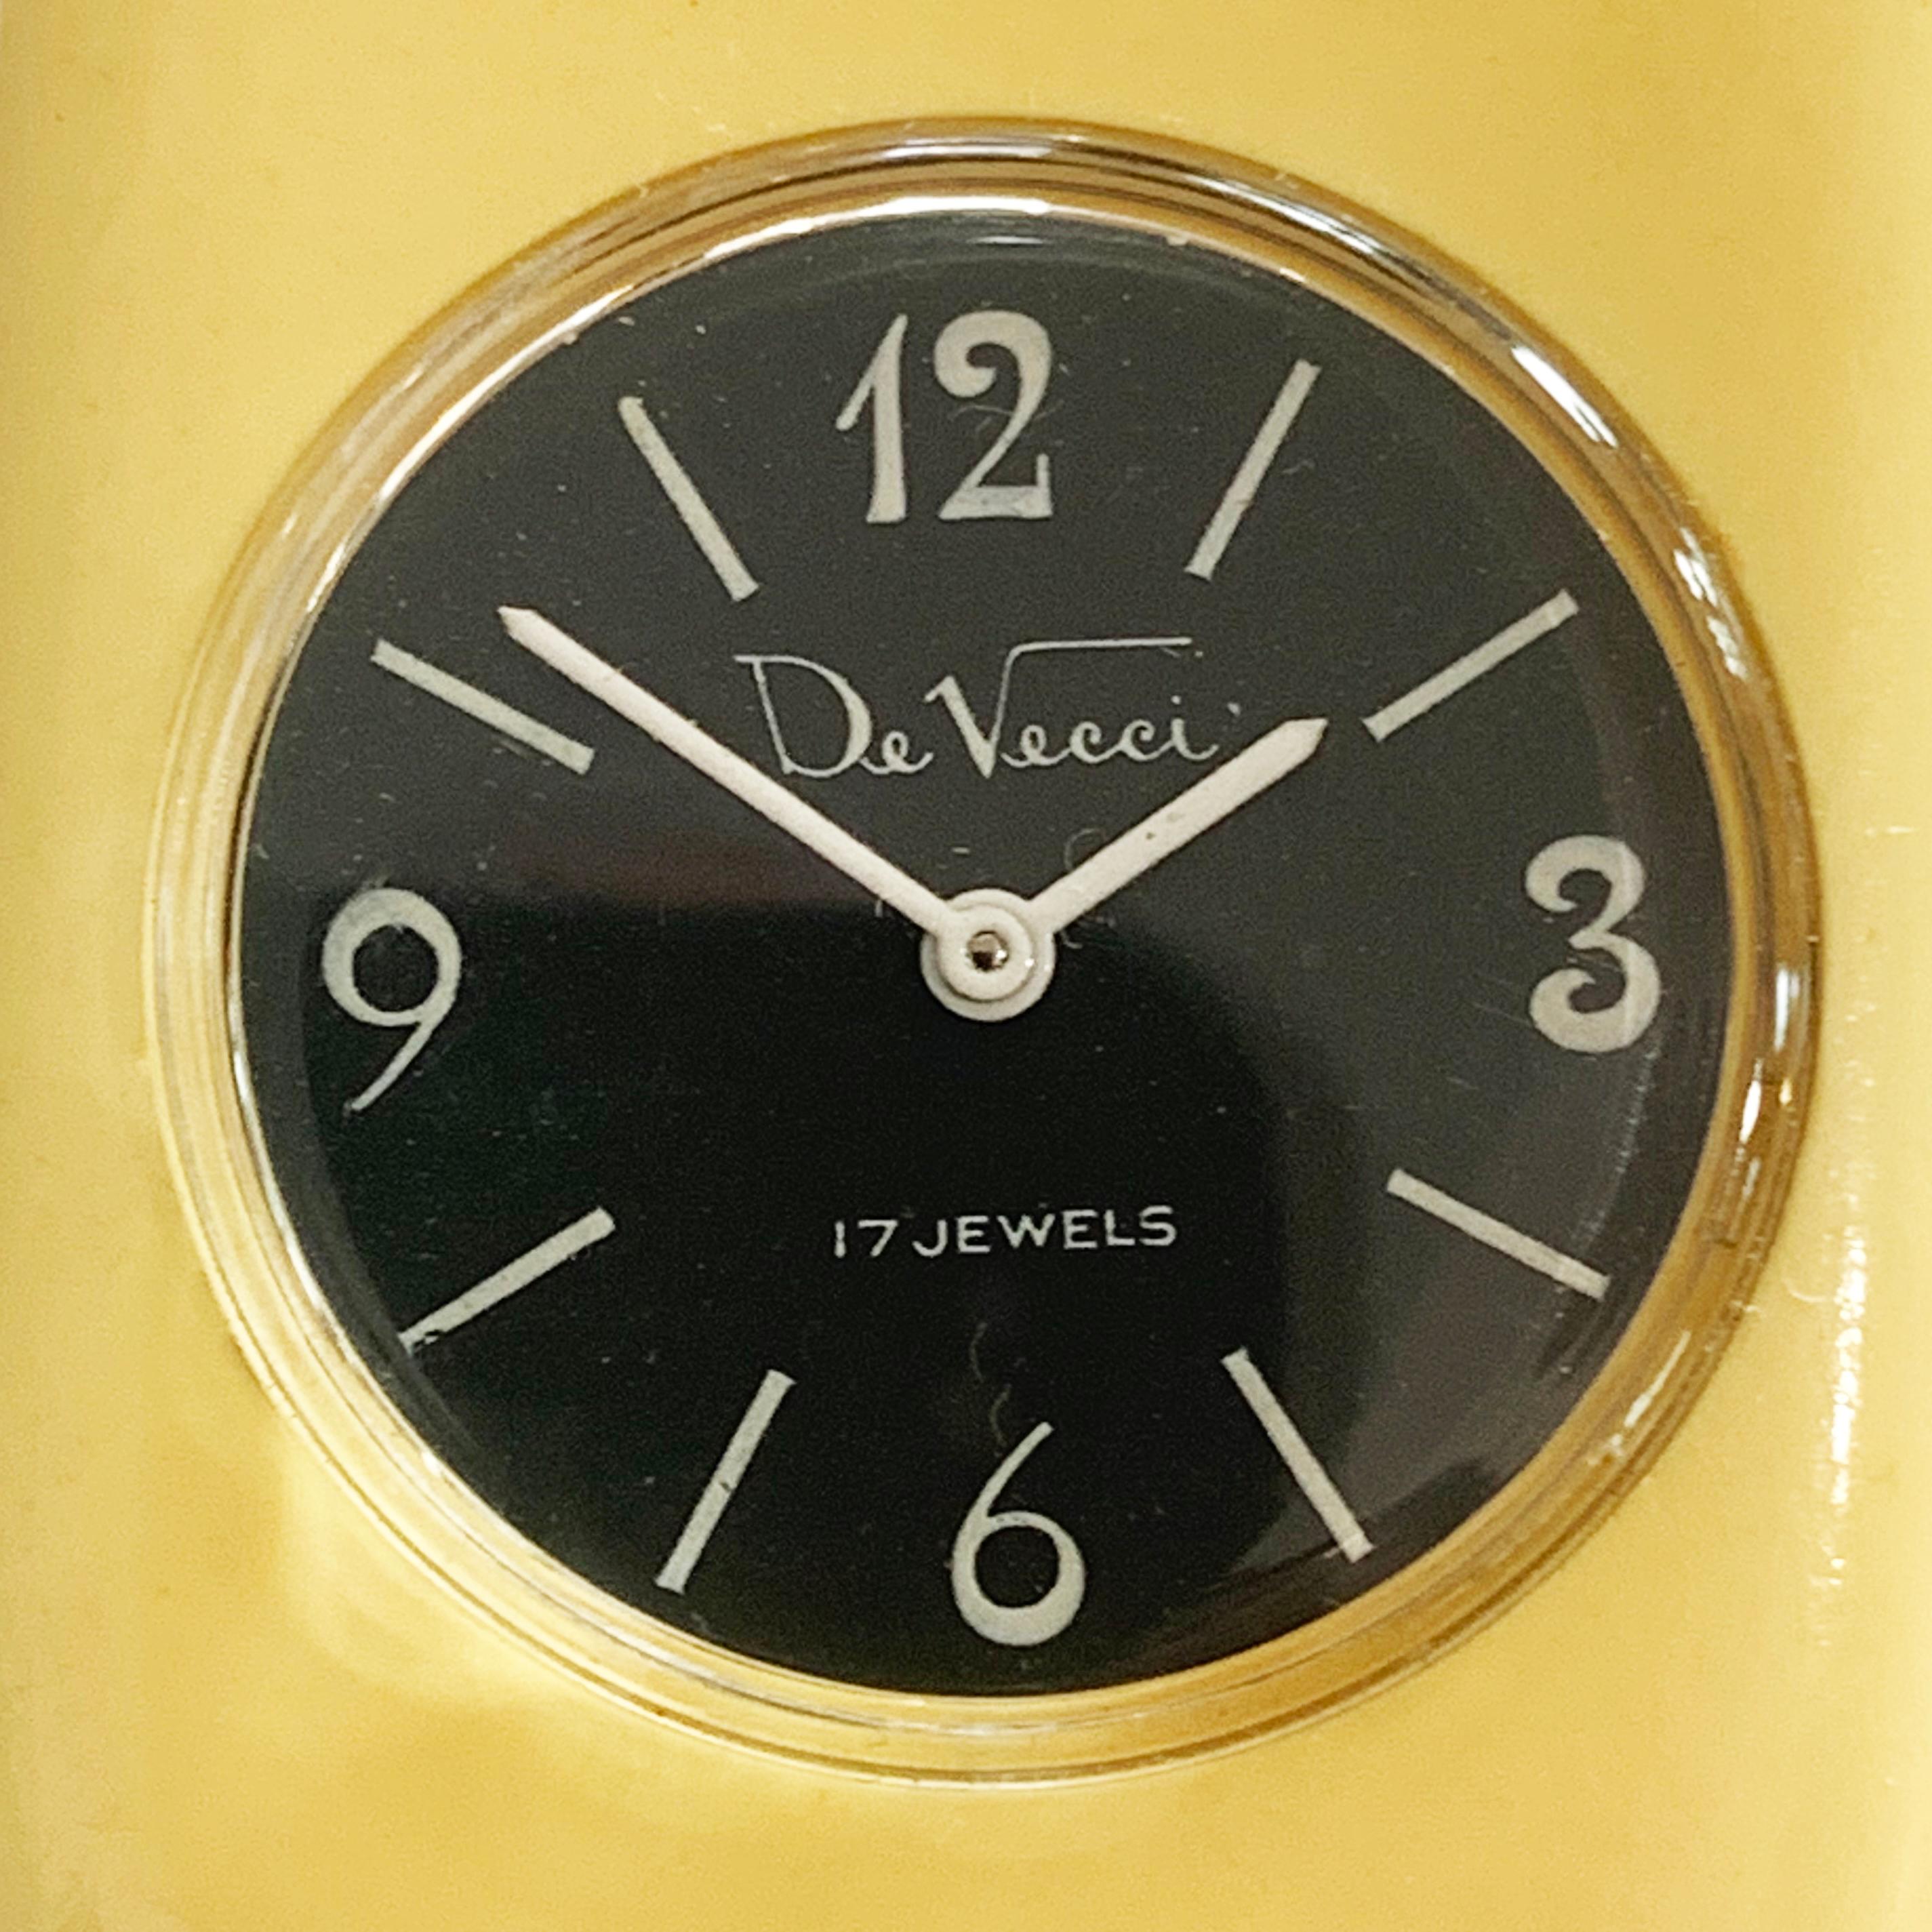 An Art Deco Clamper watch in a Cream Yellow Bakelite, by “De Vecchi” with a “17 Jewel”  movement, as marked to the black metal face, with white hands and Arabic numerals, with a touch of Nouveau influence with “curls” to ends of numerals, for the 3,